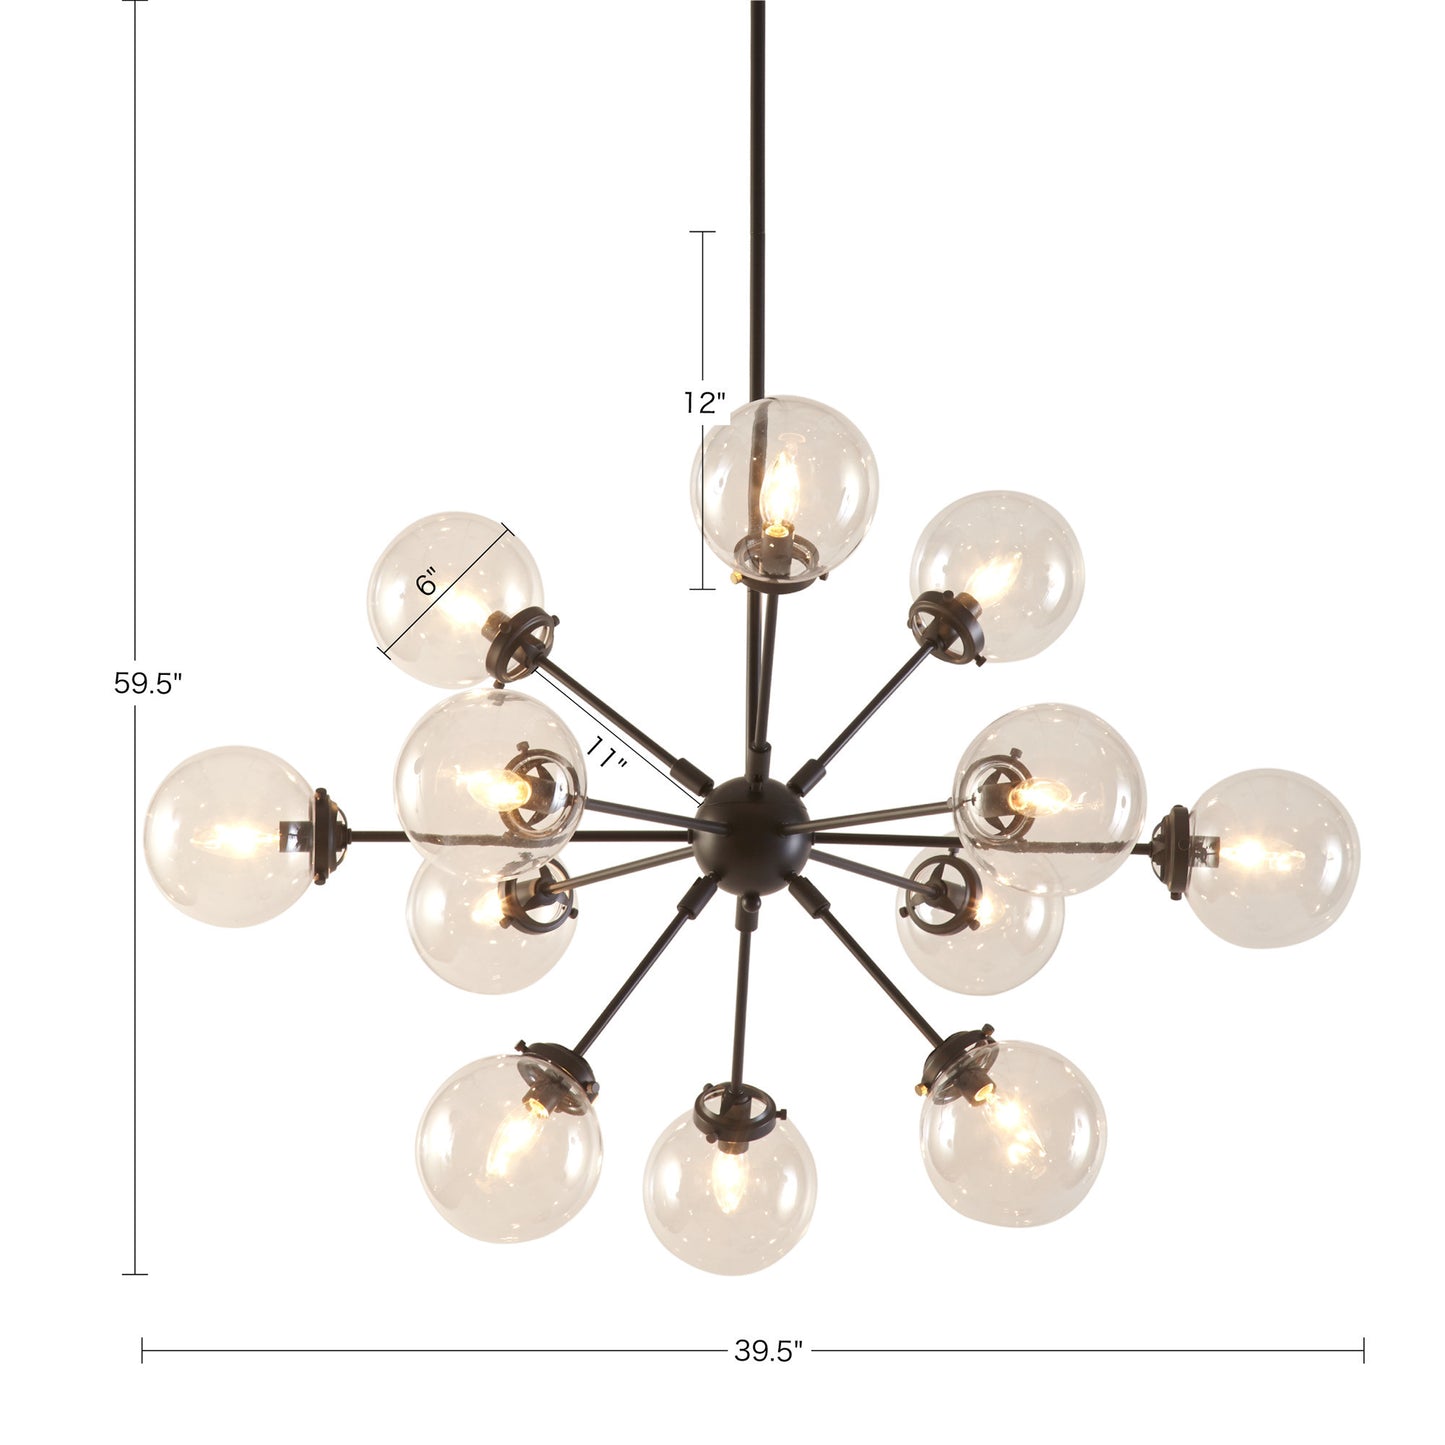 Paige 12-Light Chandelier with Oversized Globe Bulbs